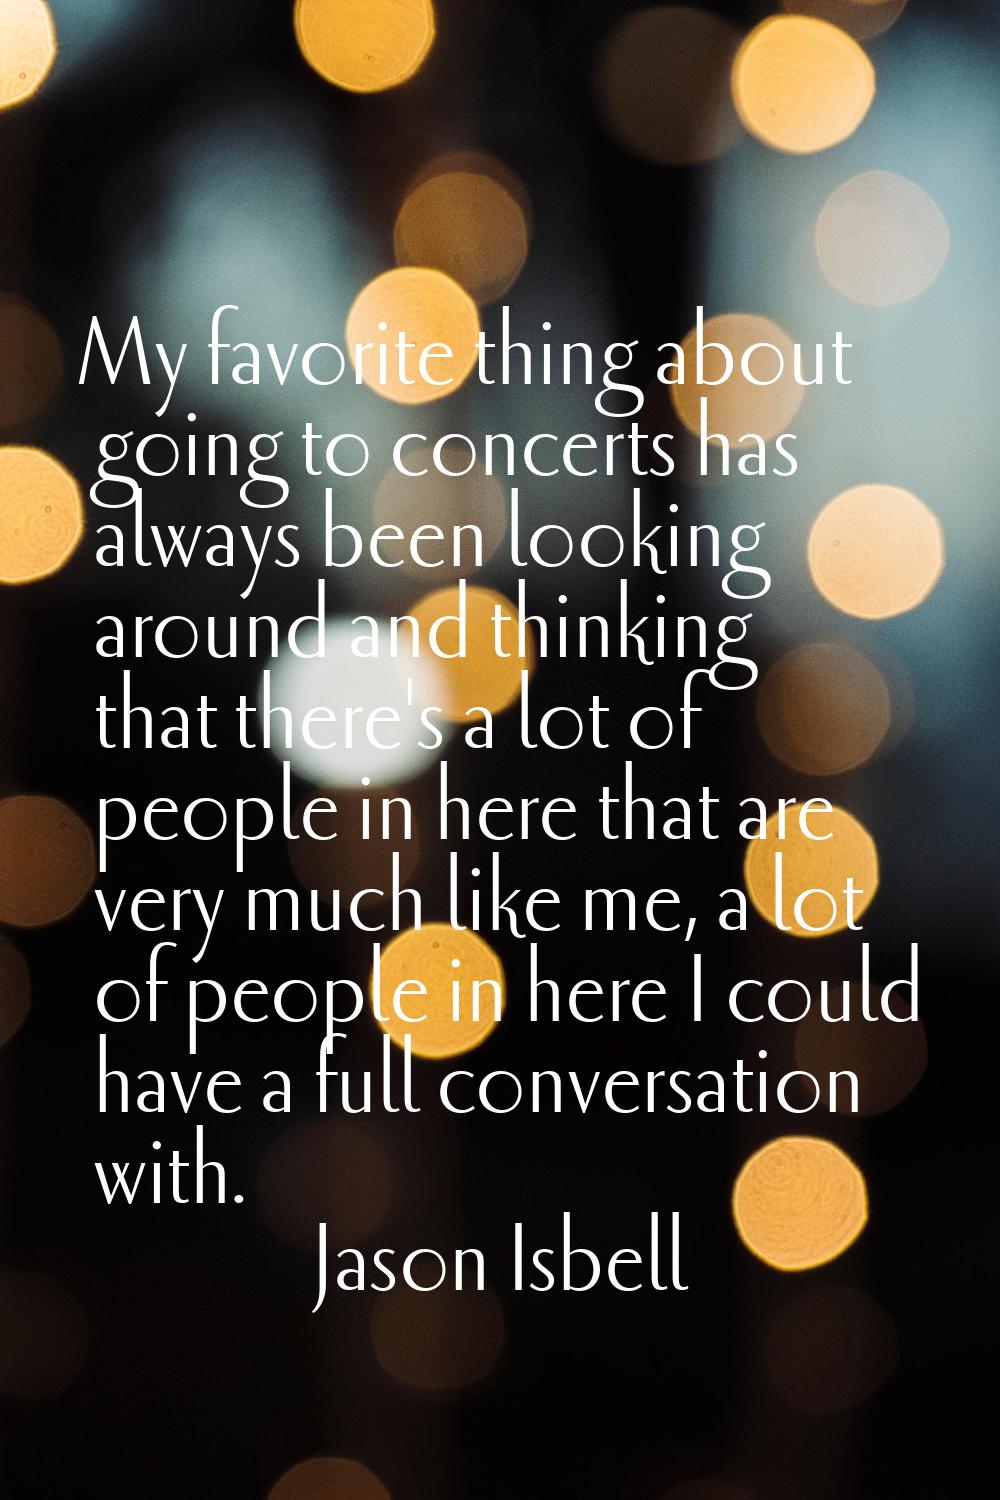 My favorite thing about going to concerts has always been looking around and thinking that there's 